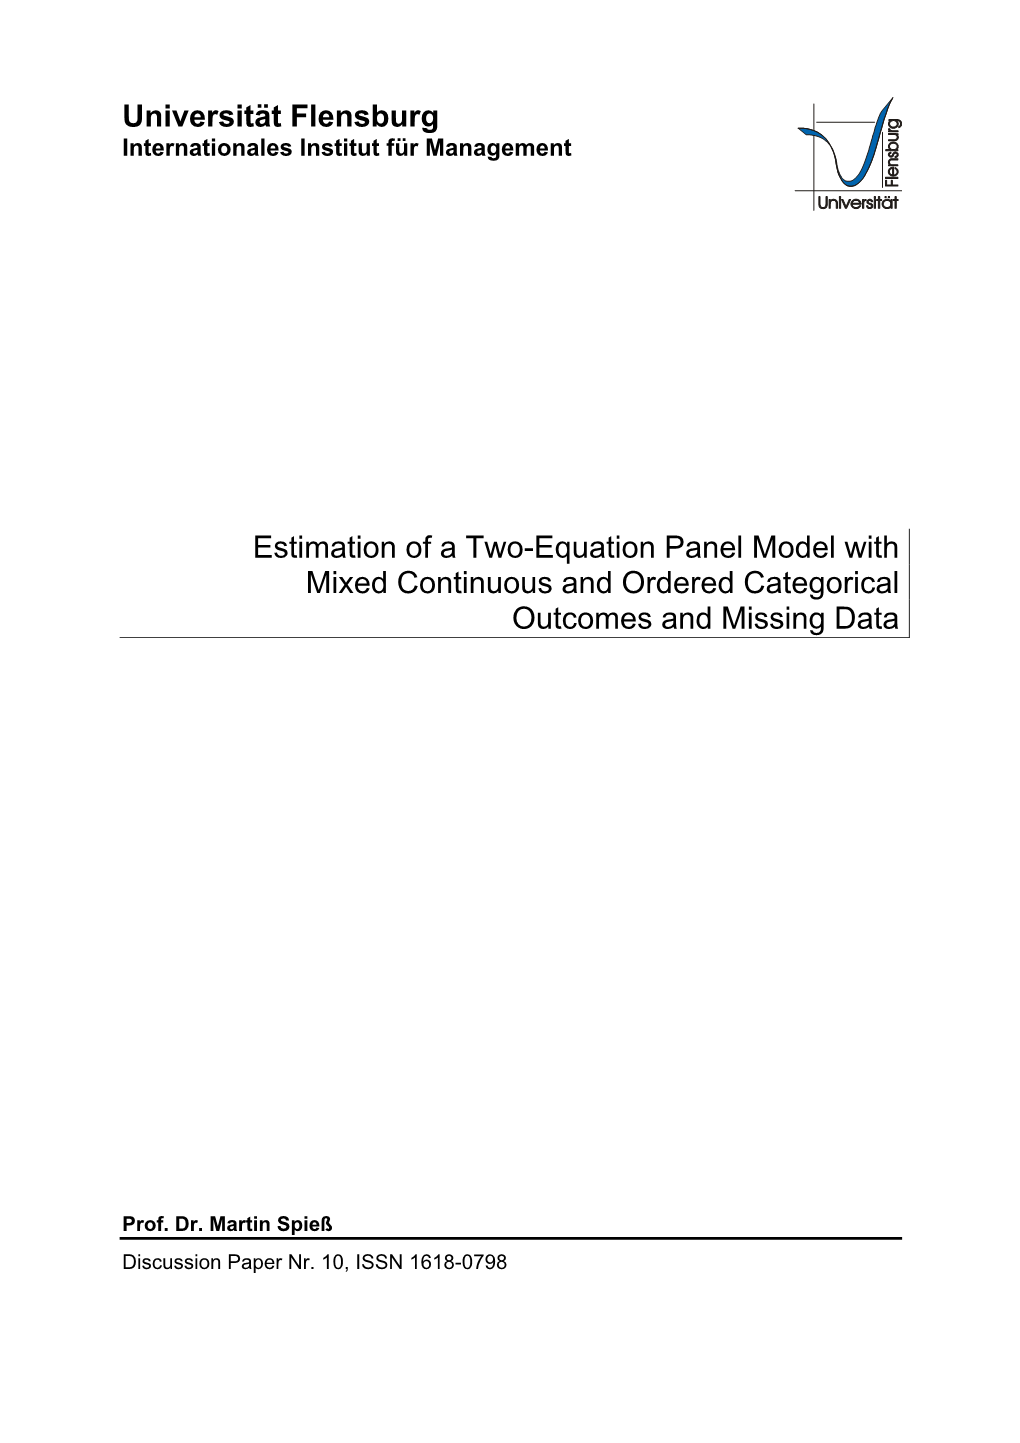 Universität Flensburg Estimation of a Two-Equation Panel Model With